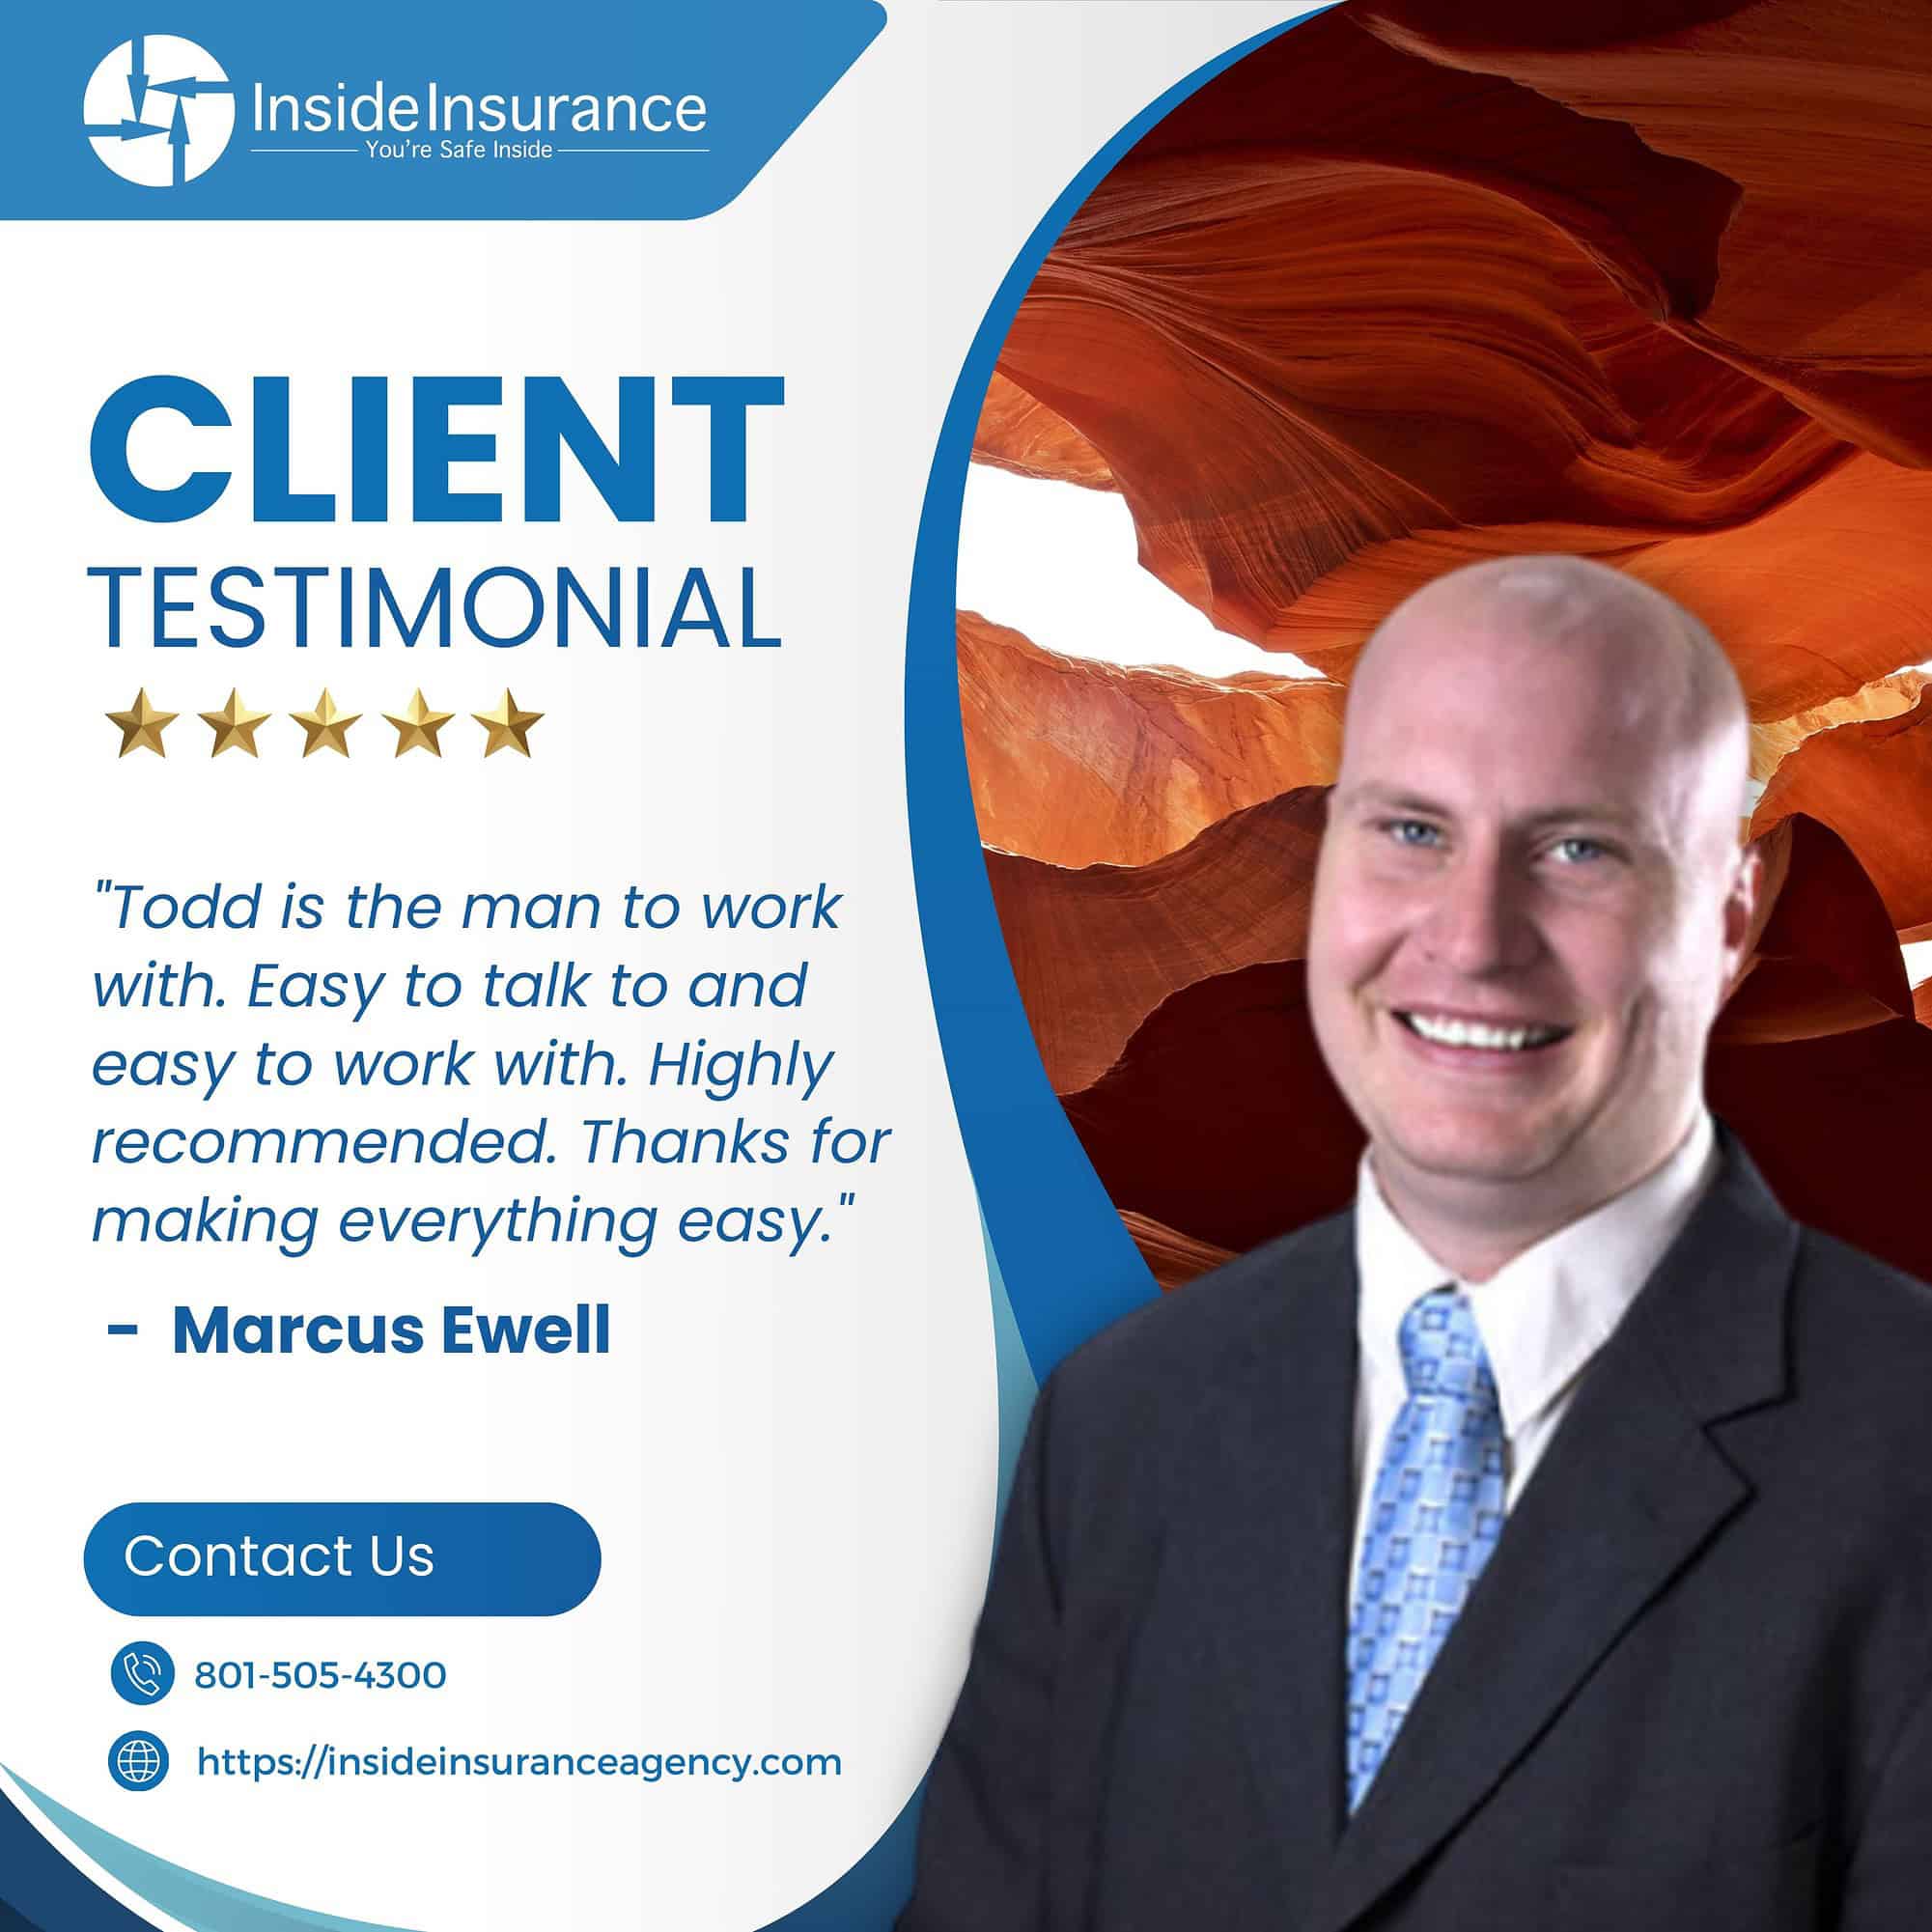 Google Review of Inside Insurance by Marcus Ewell